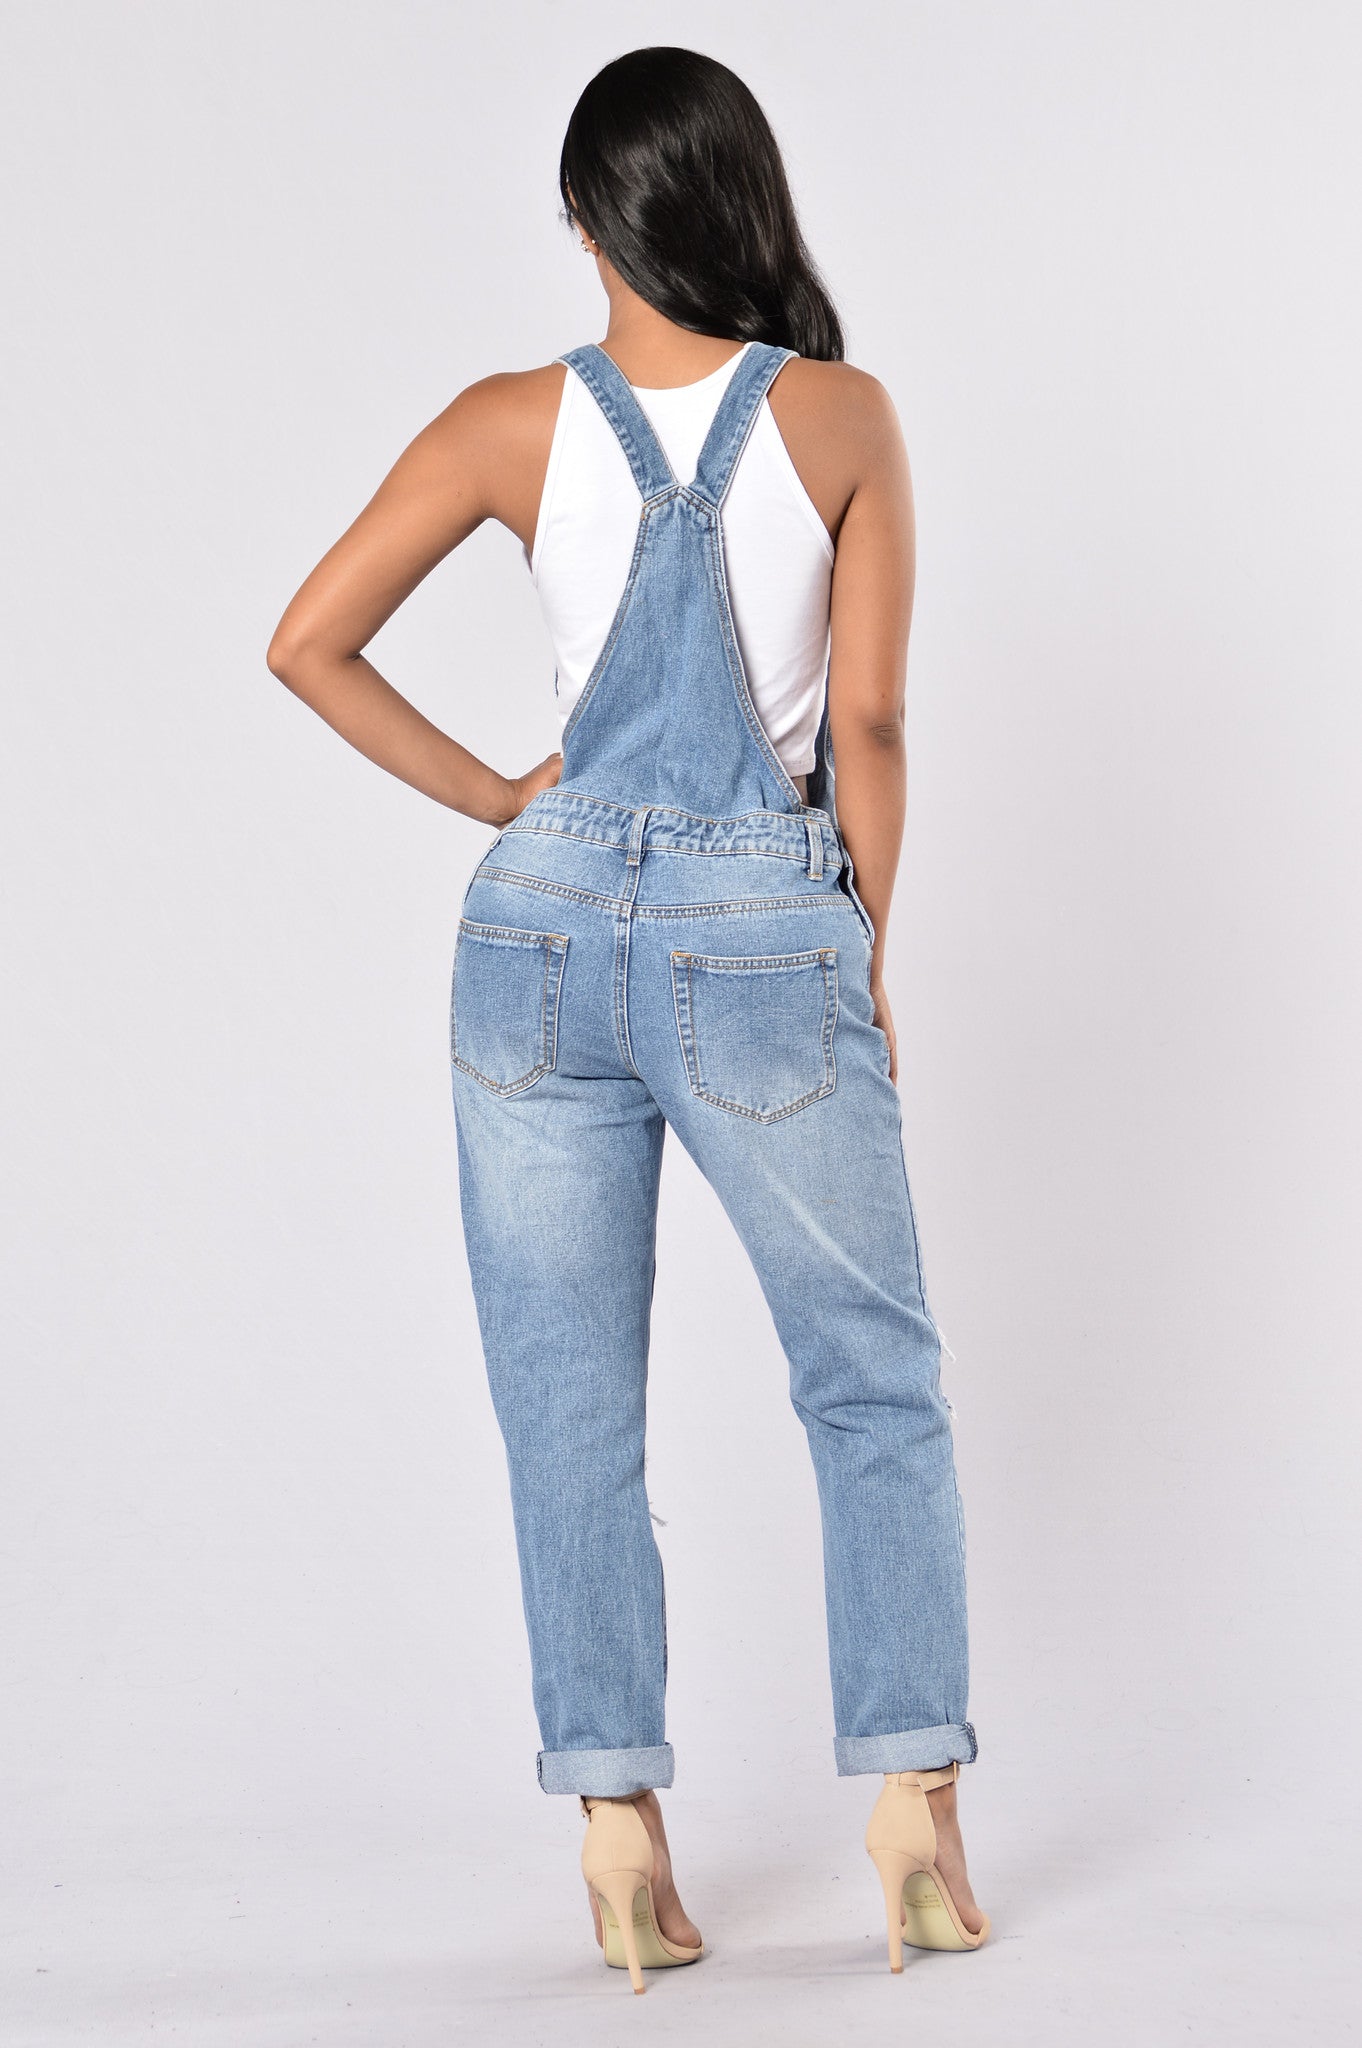 So Over You Overall - Medium Wash